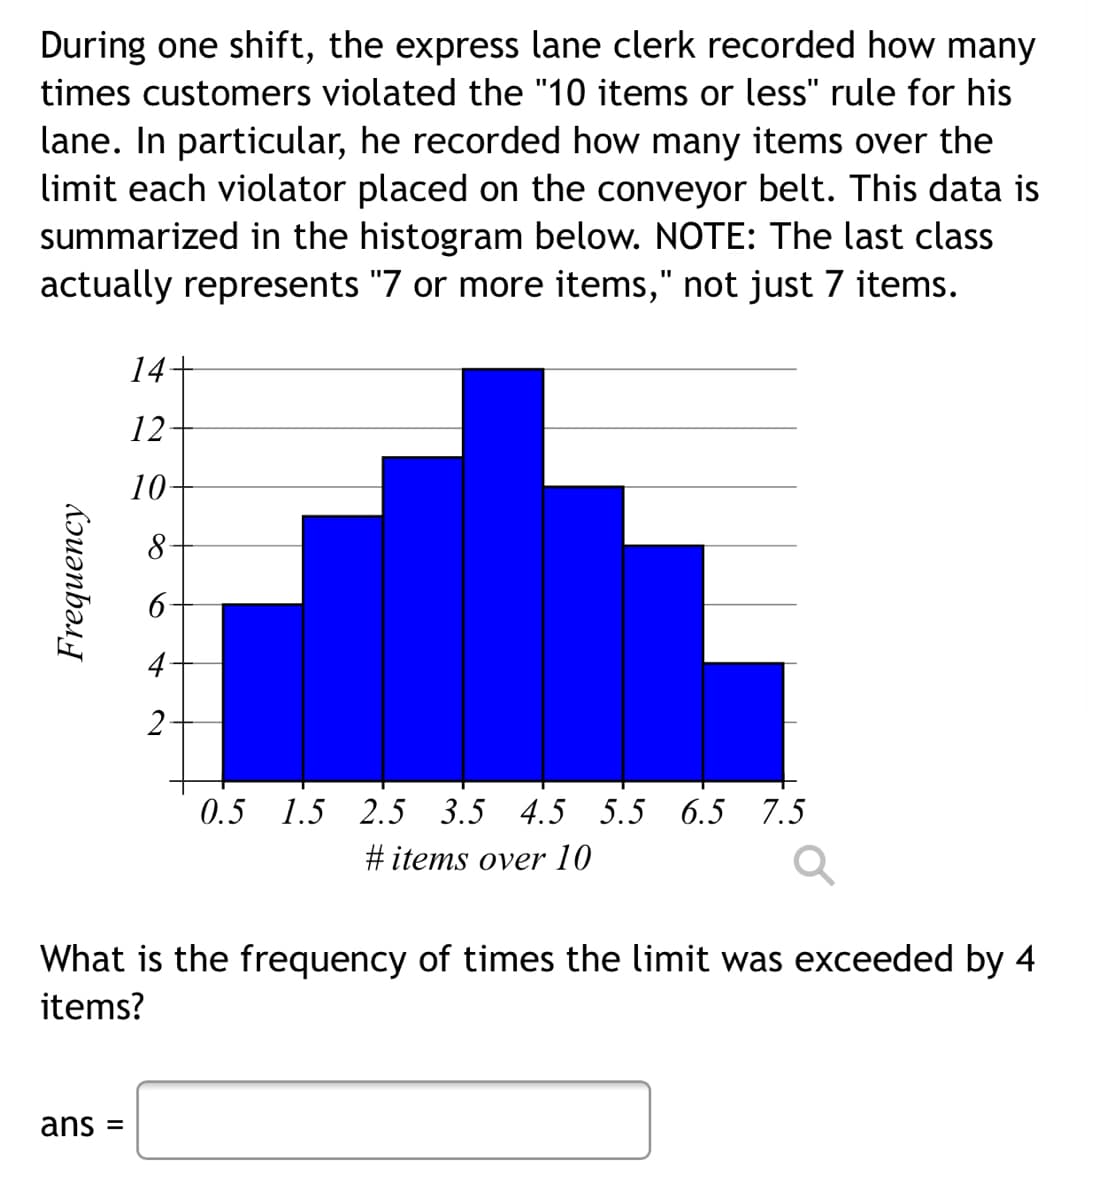 During one shift, the express lane clerk recorded how many
times customers violated the "10 items or less" rule for his
lane. In particular, he recorded how many items over the
limit each violator placed on the conveyor belt. This data is
summarized in the histogram below. NOTE: The last class
actually represents "7 or more items," not just 7 items.
14+
12
10-
8
4
2
0.5 1.5 2.5 3.5 4.5 5.5 6.5 7.5
#items over 10
What is the frequency of times the limit was exceeded by 4
items?
ans =
Frequency